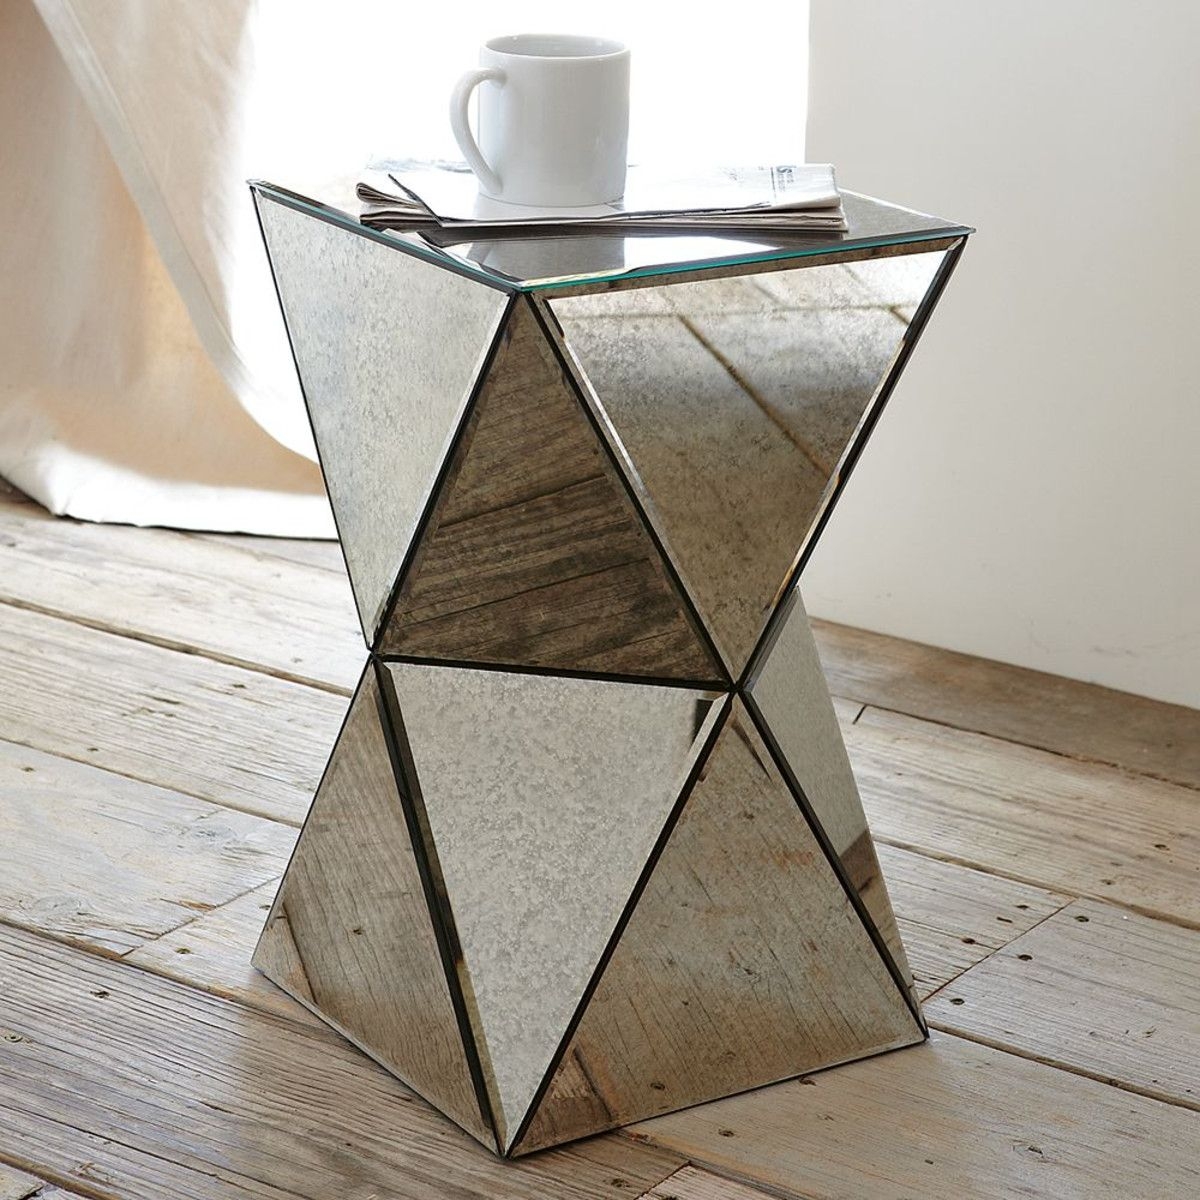 Mirrored round end table